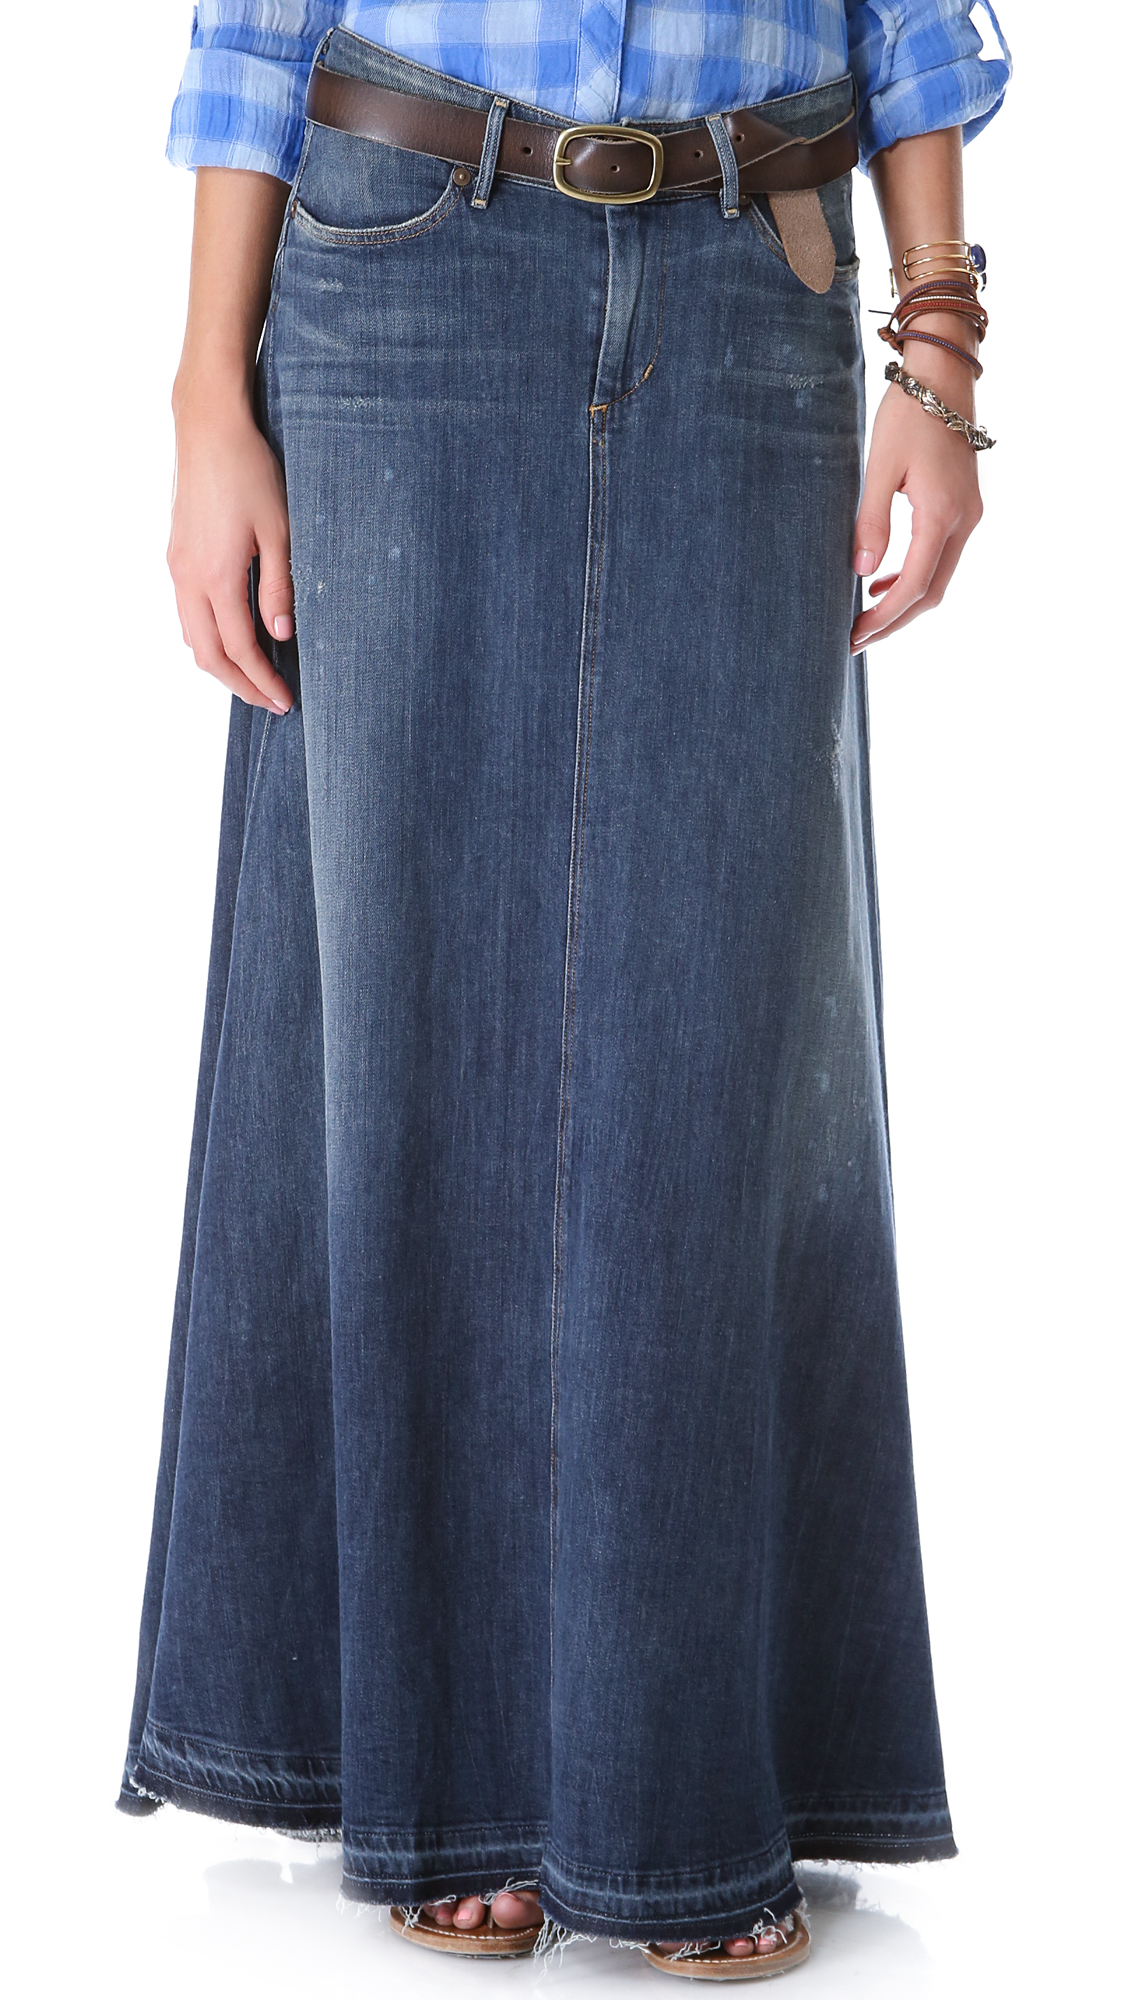 Citizens Humanity Anja Skirt in Blue